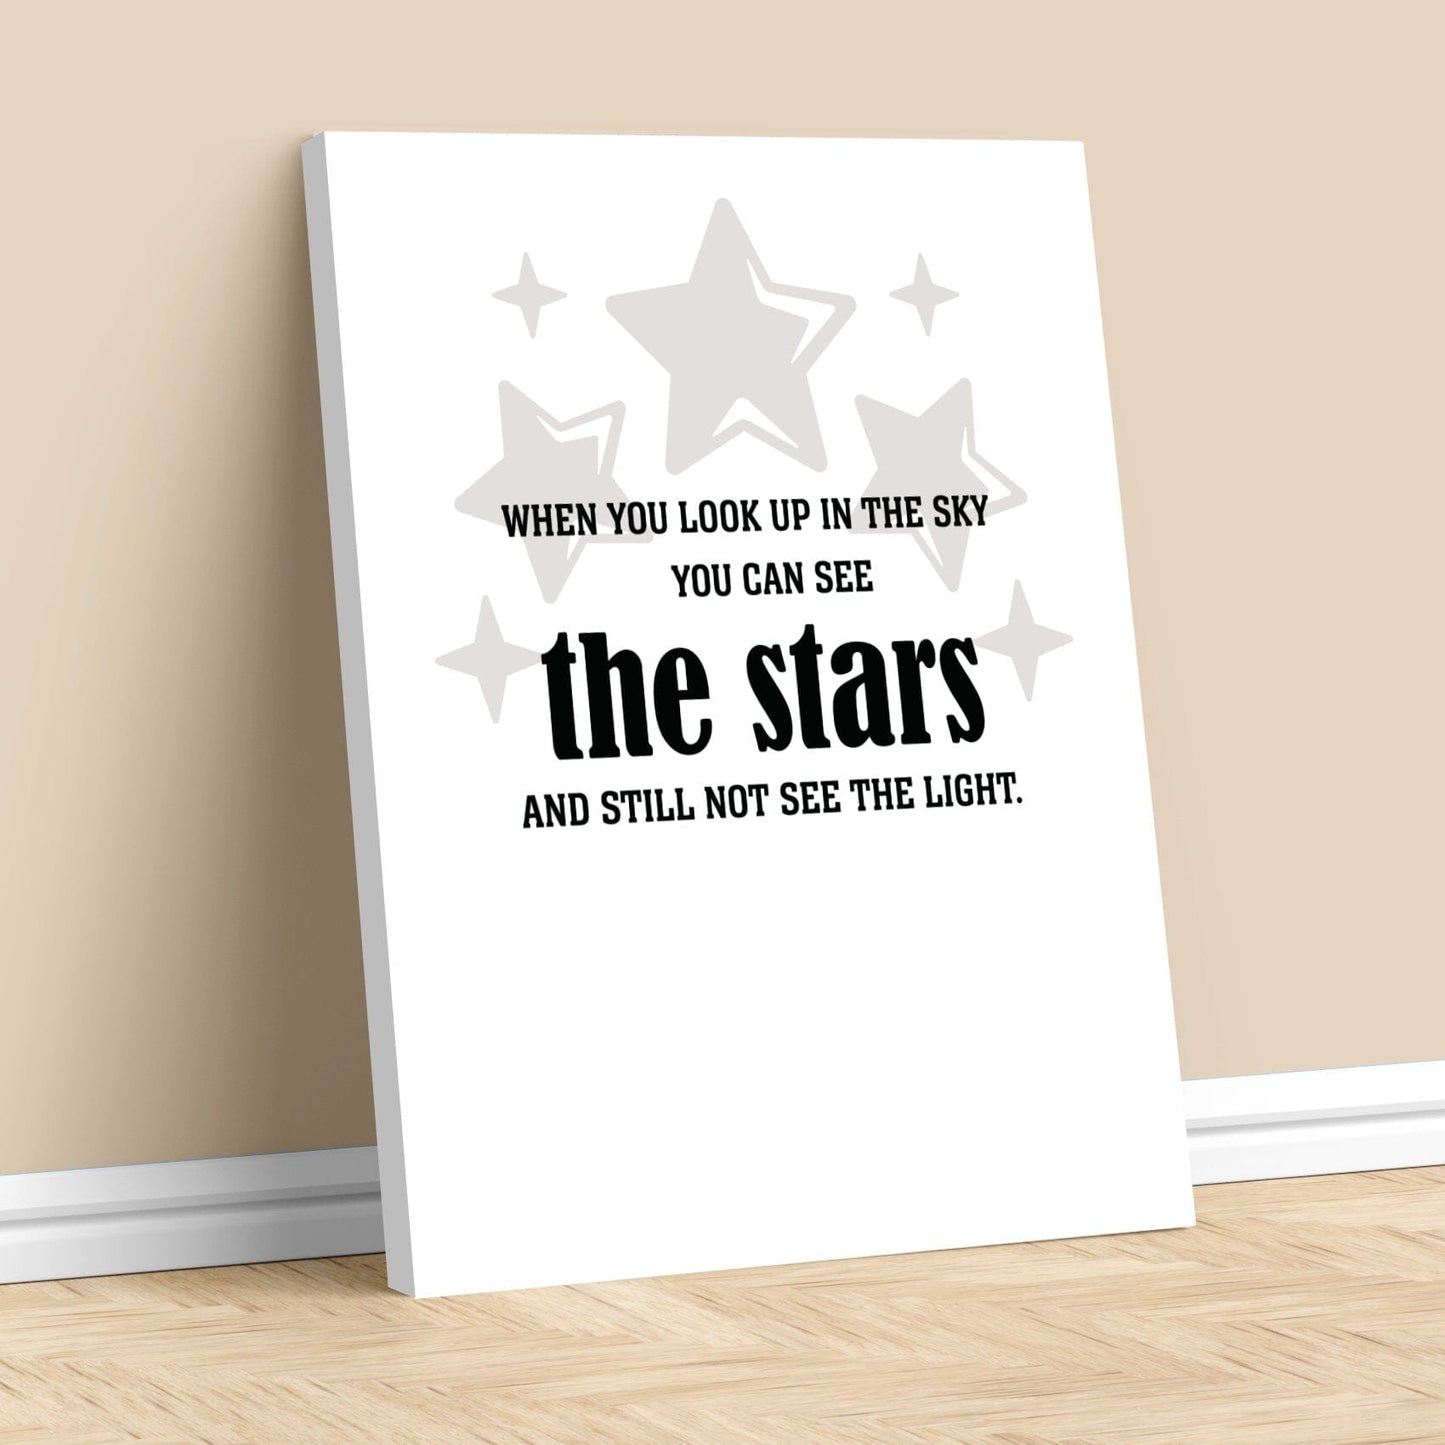 See the Stars and Still not see the Light - Wise and Witty Print Wise and Wiseass Quotes Song Lyrics Art 11x14 Canvas Wrap 